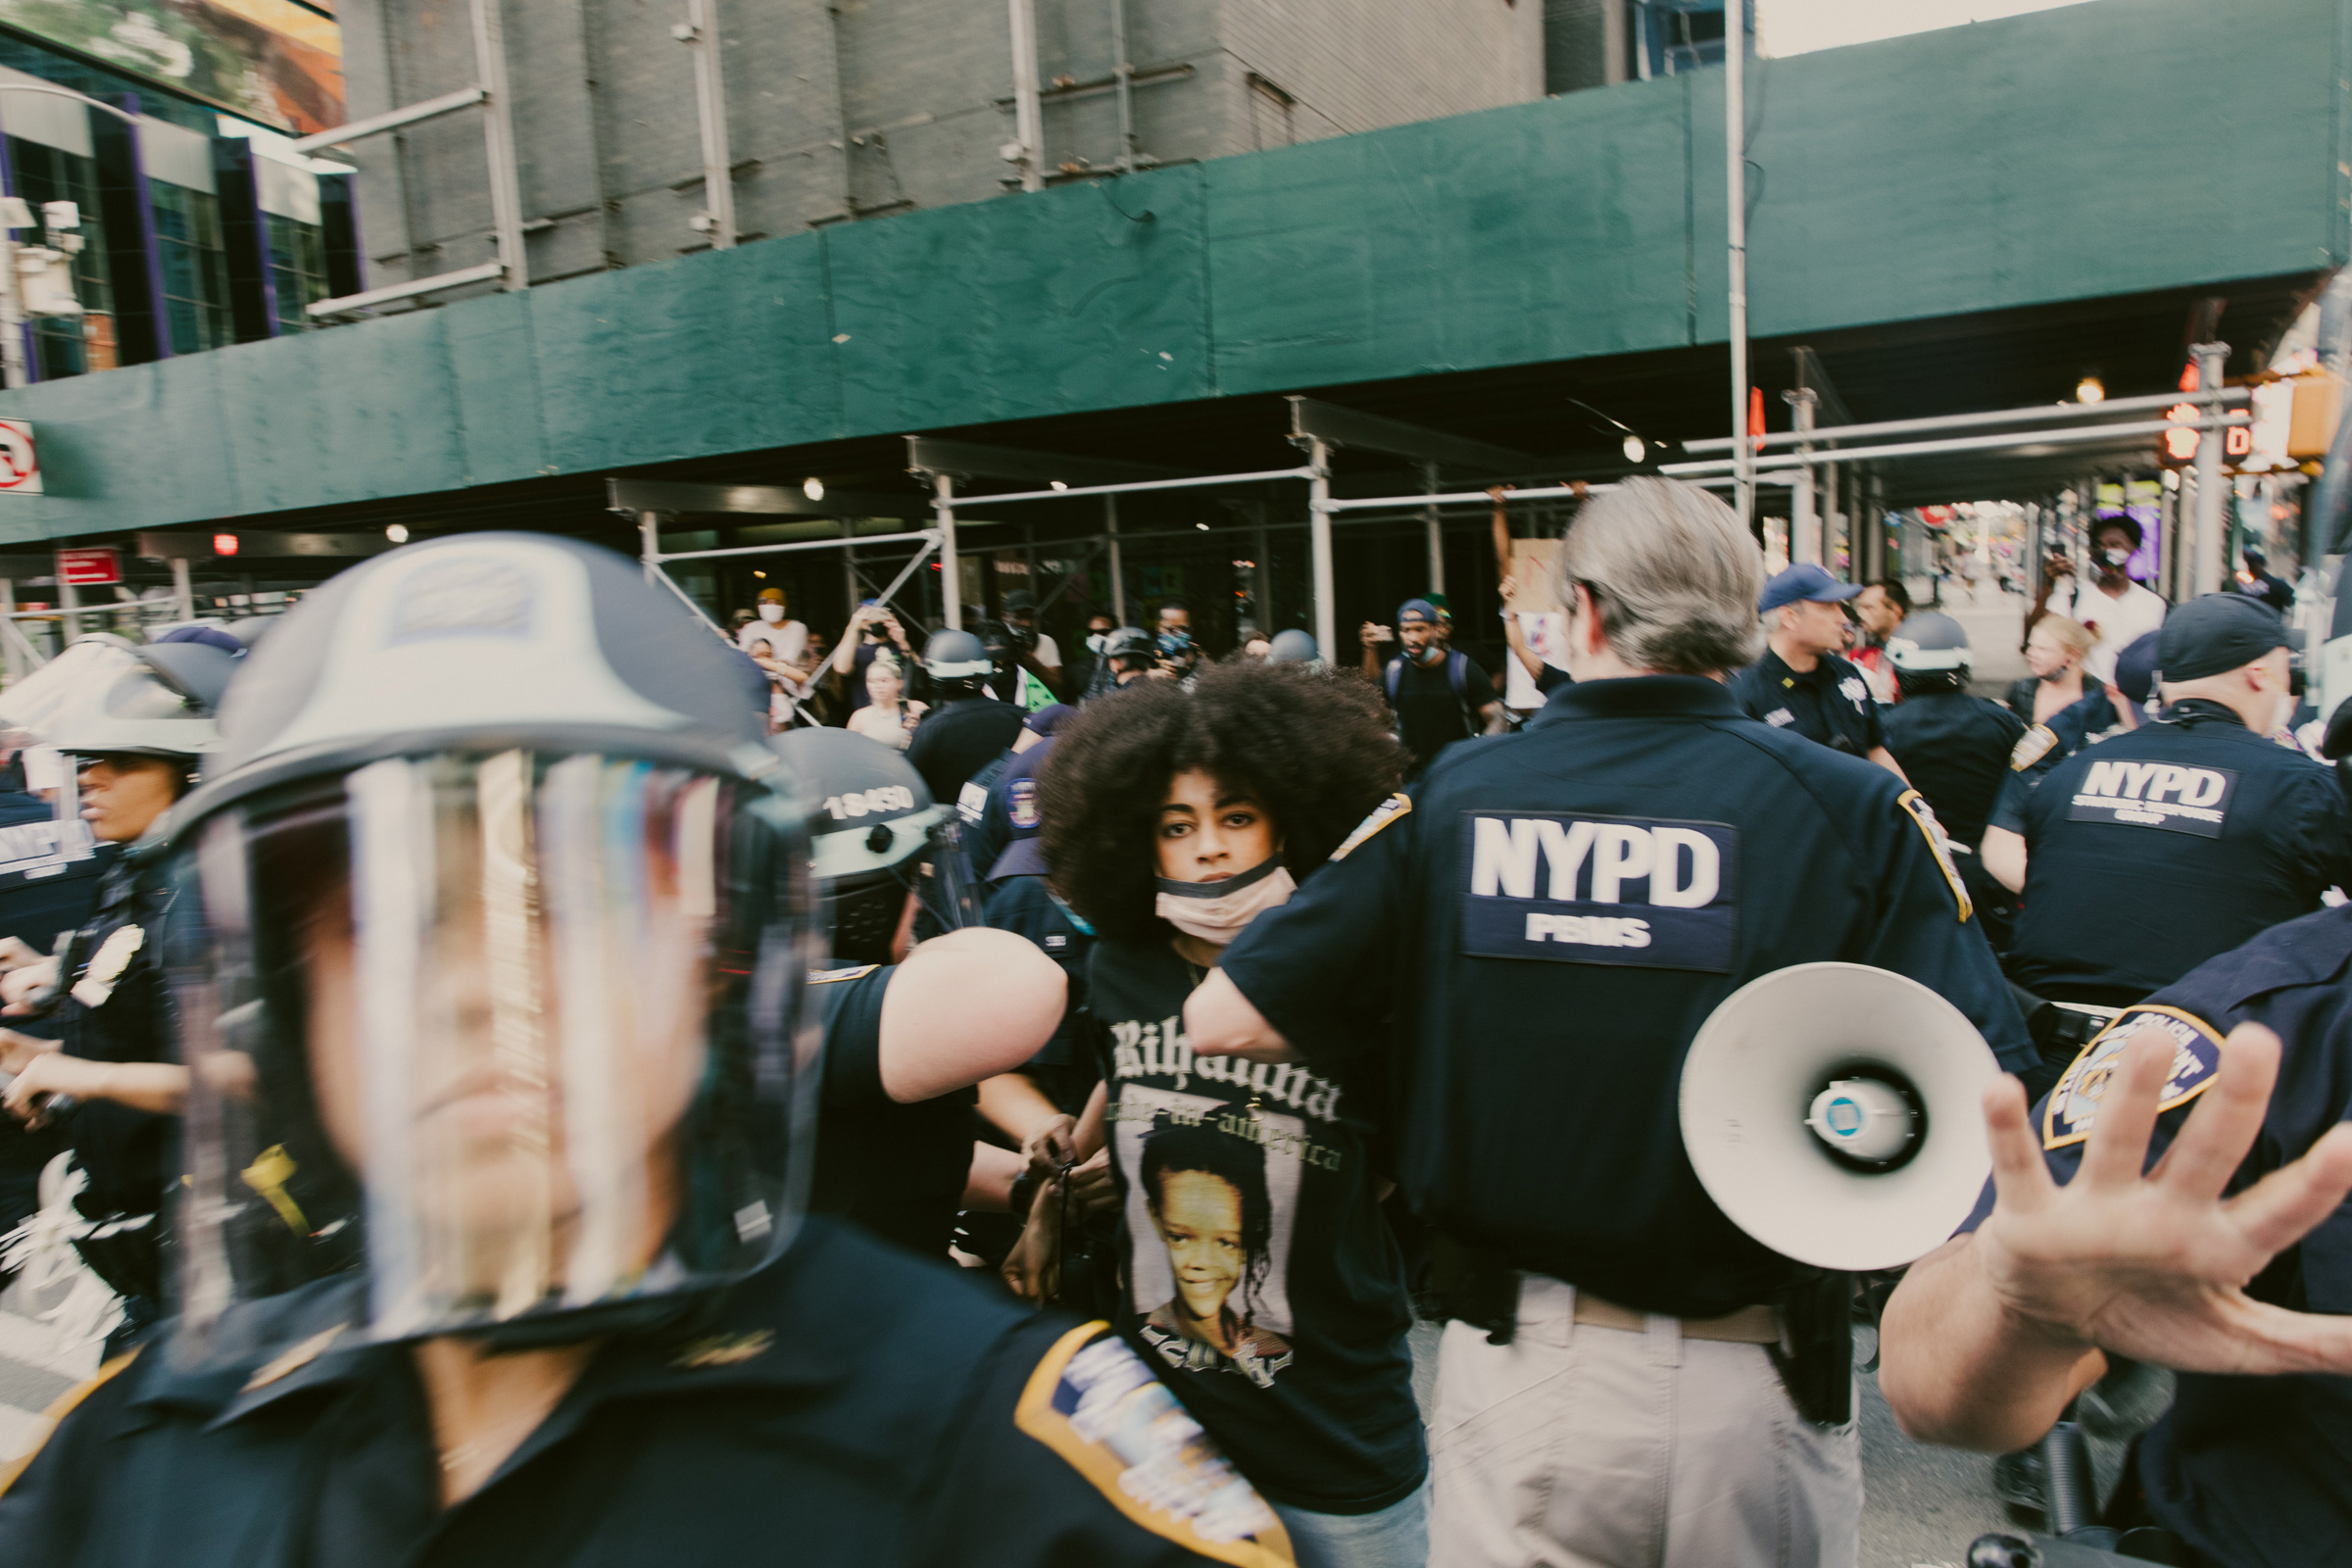 Ria Foye as she is arrested in Times Square after peacefully marching from Harlem on May 30. She was detained for more than seven hours. (Mark Clennon)